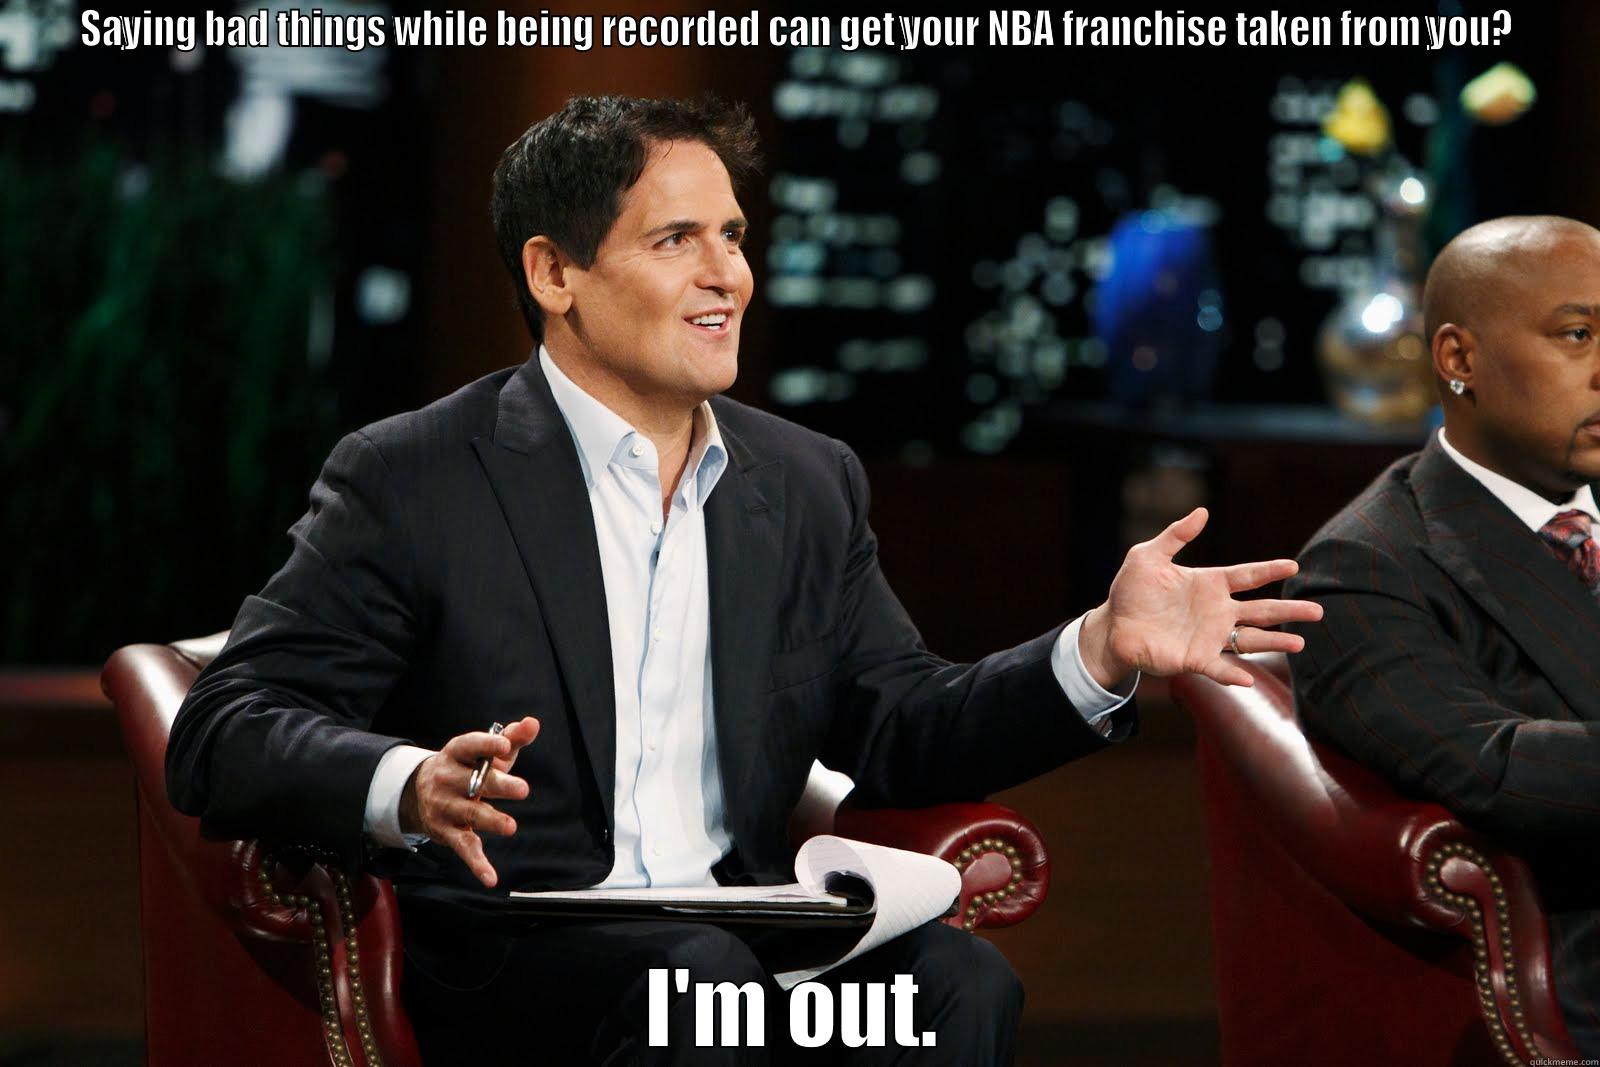 Shark Tank - SAYING BAD THINGS WHILE BEING RECORDED CAN GET YOUR NBA FRANCHISE TAKEN FROM YOU? I'M OUT. Misc